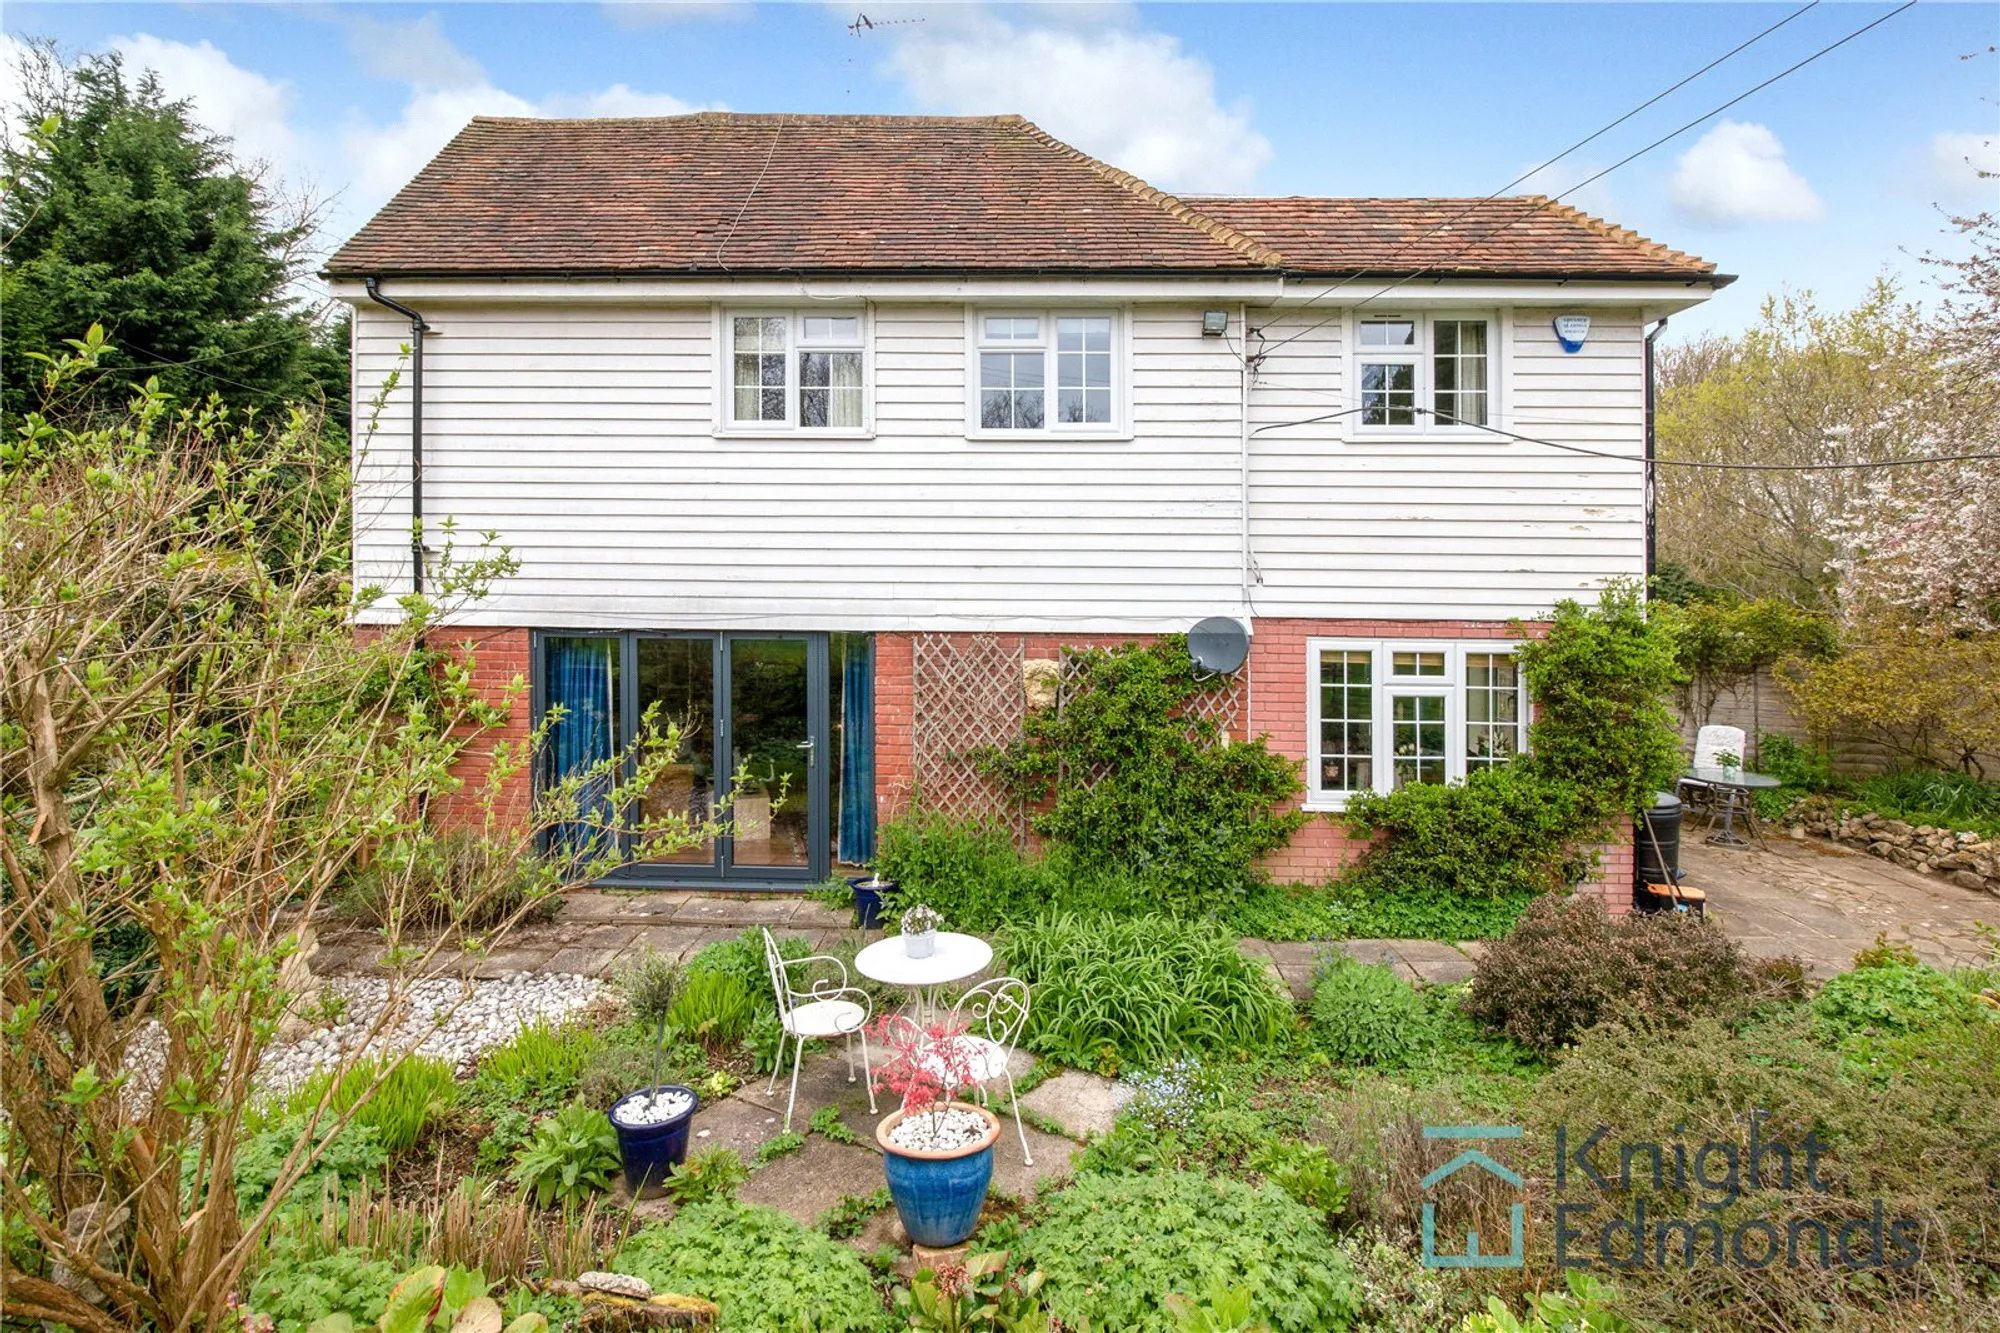 3 bed end of terrace house for sale in Hilltop, Maidstone 17